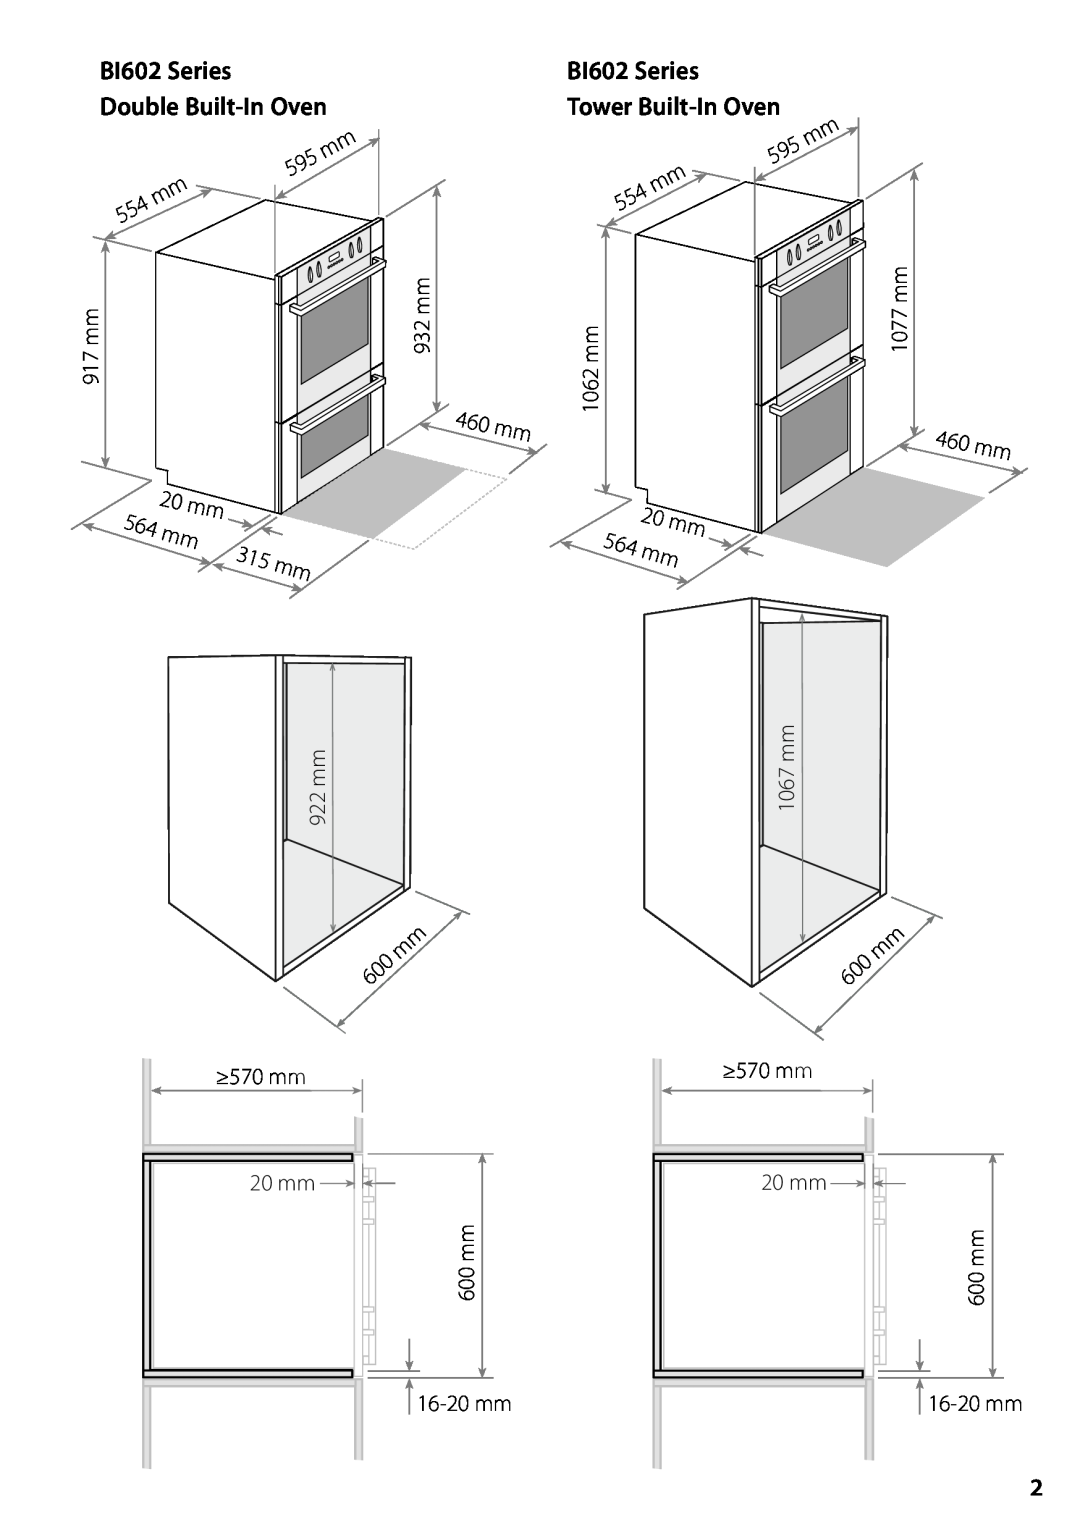 Fisher & Paykel installation instructions BI602 Series Tower Built-InOven, Double Built-InOven 